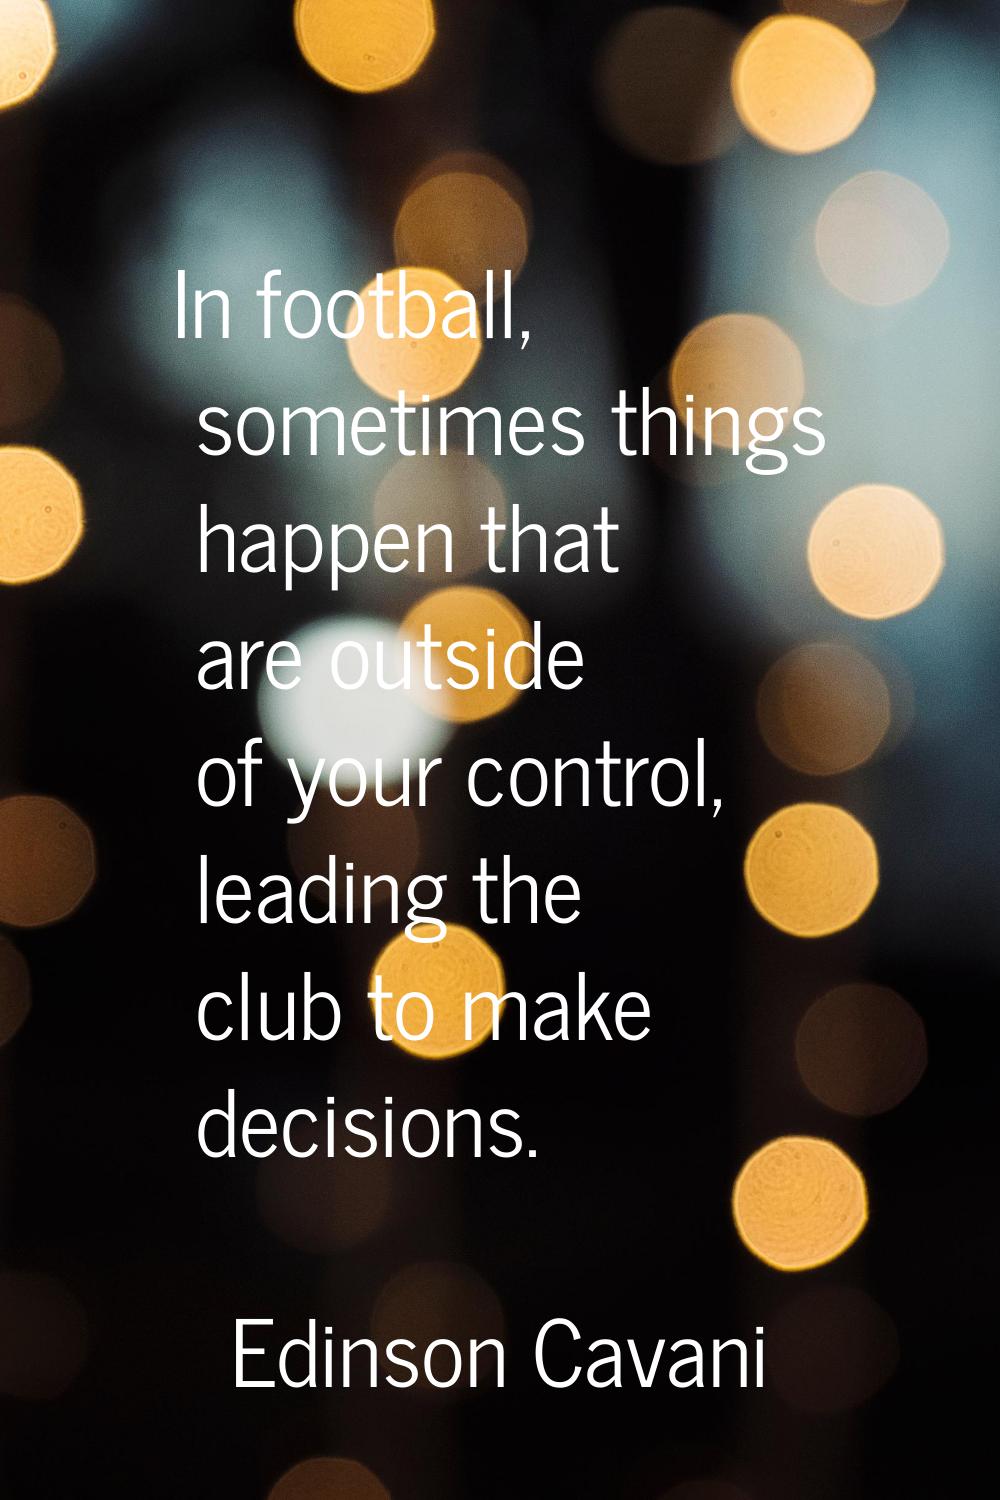 In football, sometimes things happen that are outside of your control, leading the club to make dec